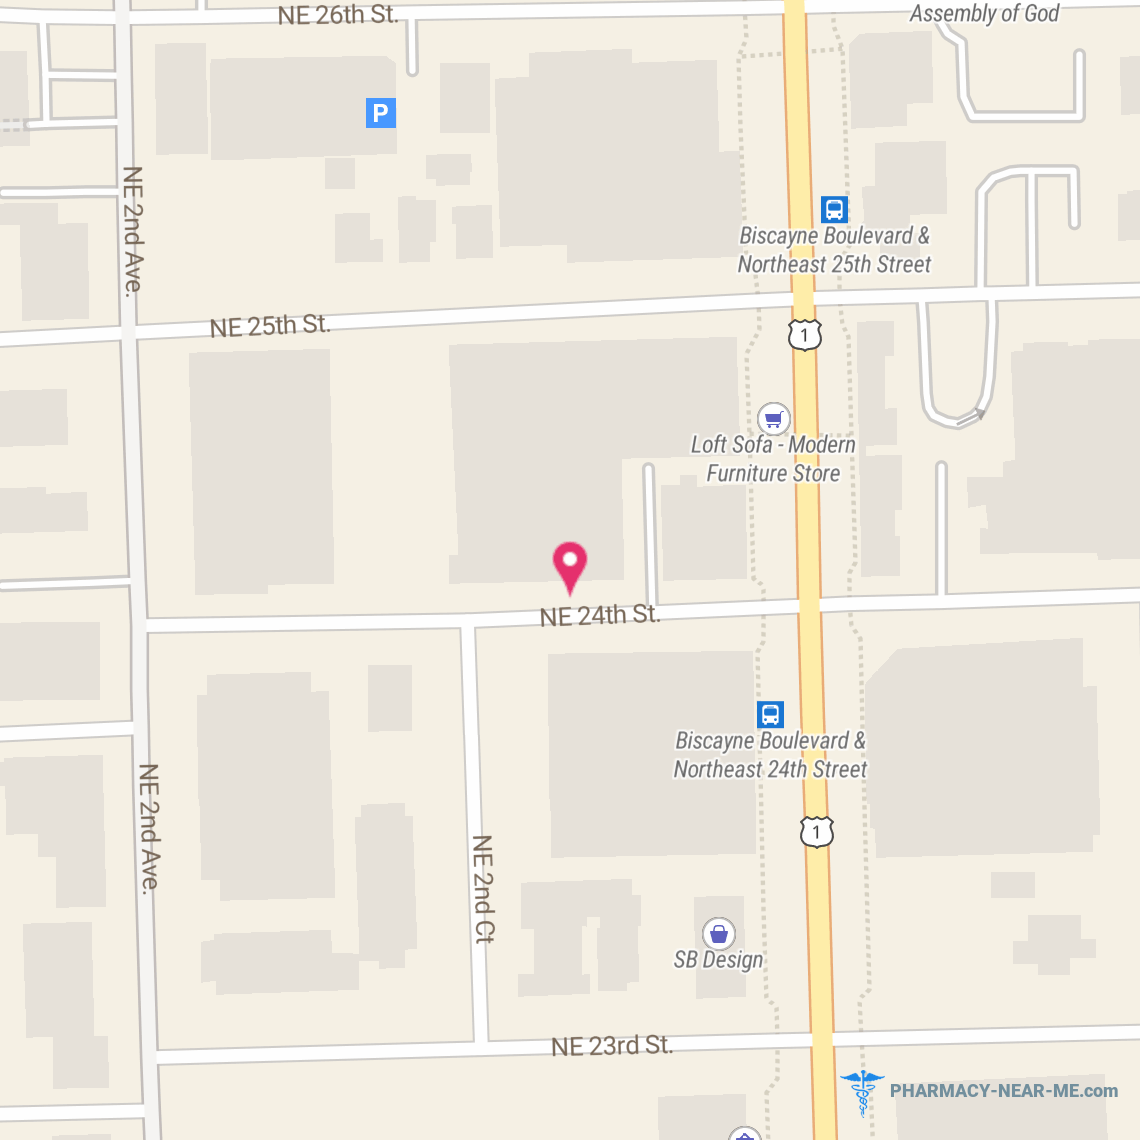 A-1 PHARMACY - Pharmacy Hours, Phone, Reviews & Information: 265 Northeast 24th Street, Miami, Florida 33137, United States